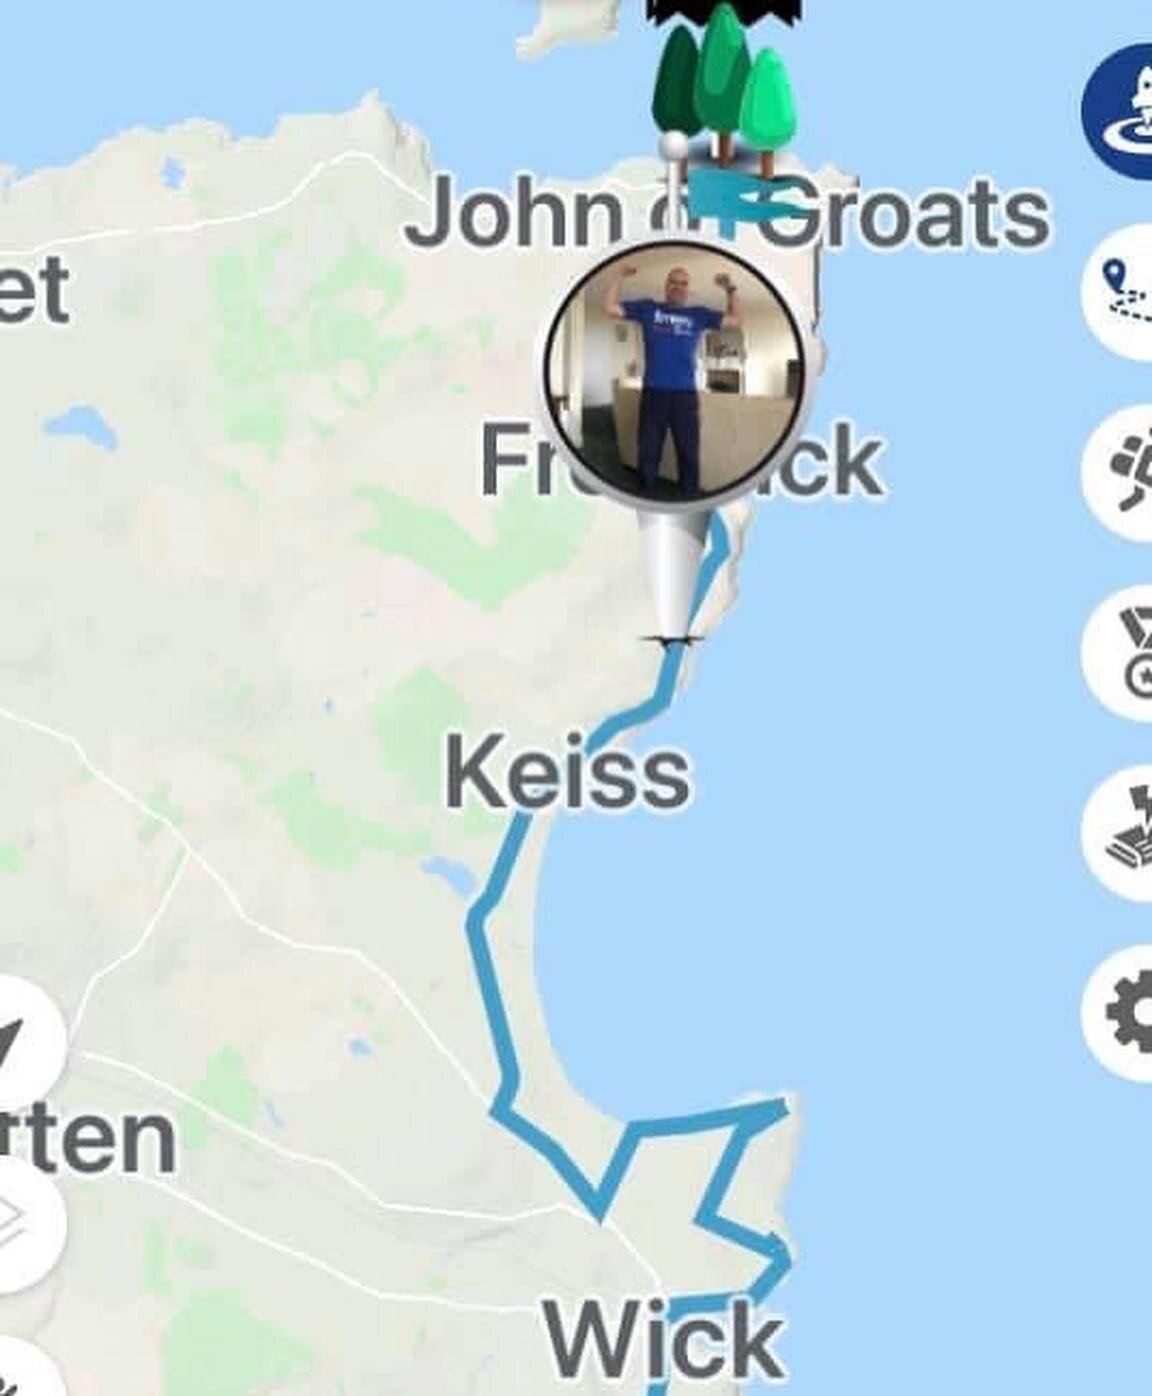 IT&rsquo;S THE FINAL COUNTDOWN...

Day 35 - Tomorrow John will finish the Lands End to John O&rsquo;Groats Challenge after completing 1,083 miles in just 36 days!!!! This means that on average John ran, walked or cycled 30 miles every day 😱 

We are